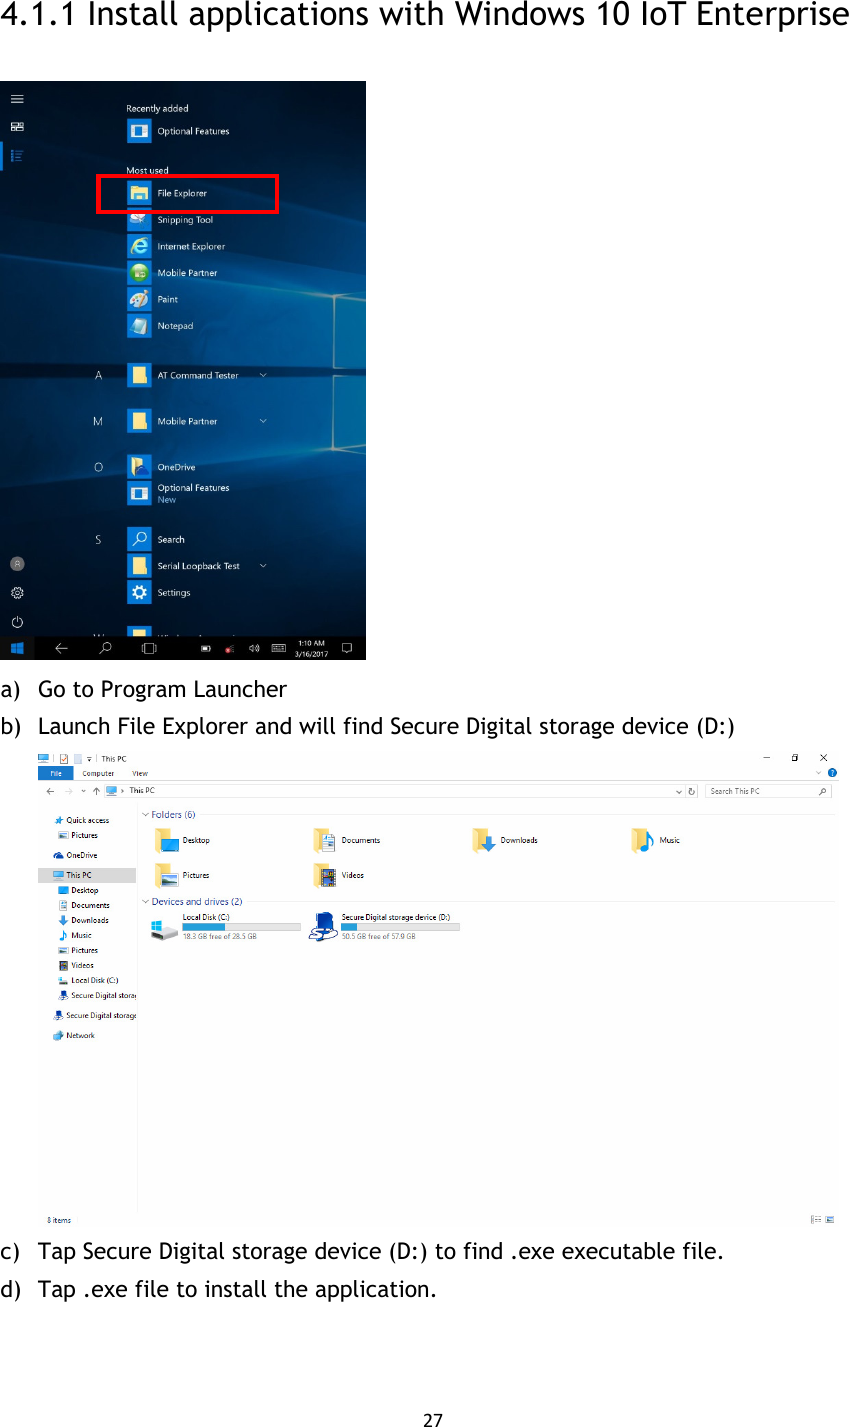 27  4.1.1 Install applications with Windows 10 IoT Enterprise    a) Go to Program Launcher b) Launch File Explorer and will find Secure Digital storage device (D:)  c) Tap Secure Digital storage device (D:) to find .exe executable file. d) Tap .exe file to install the application.   